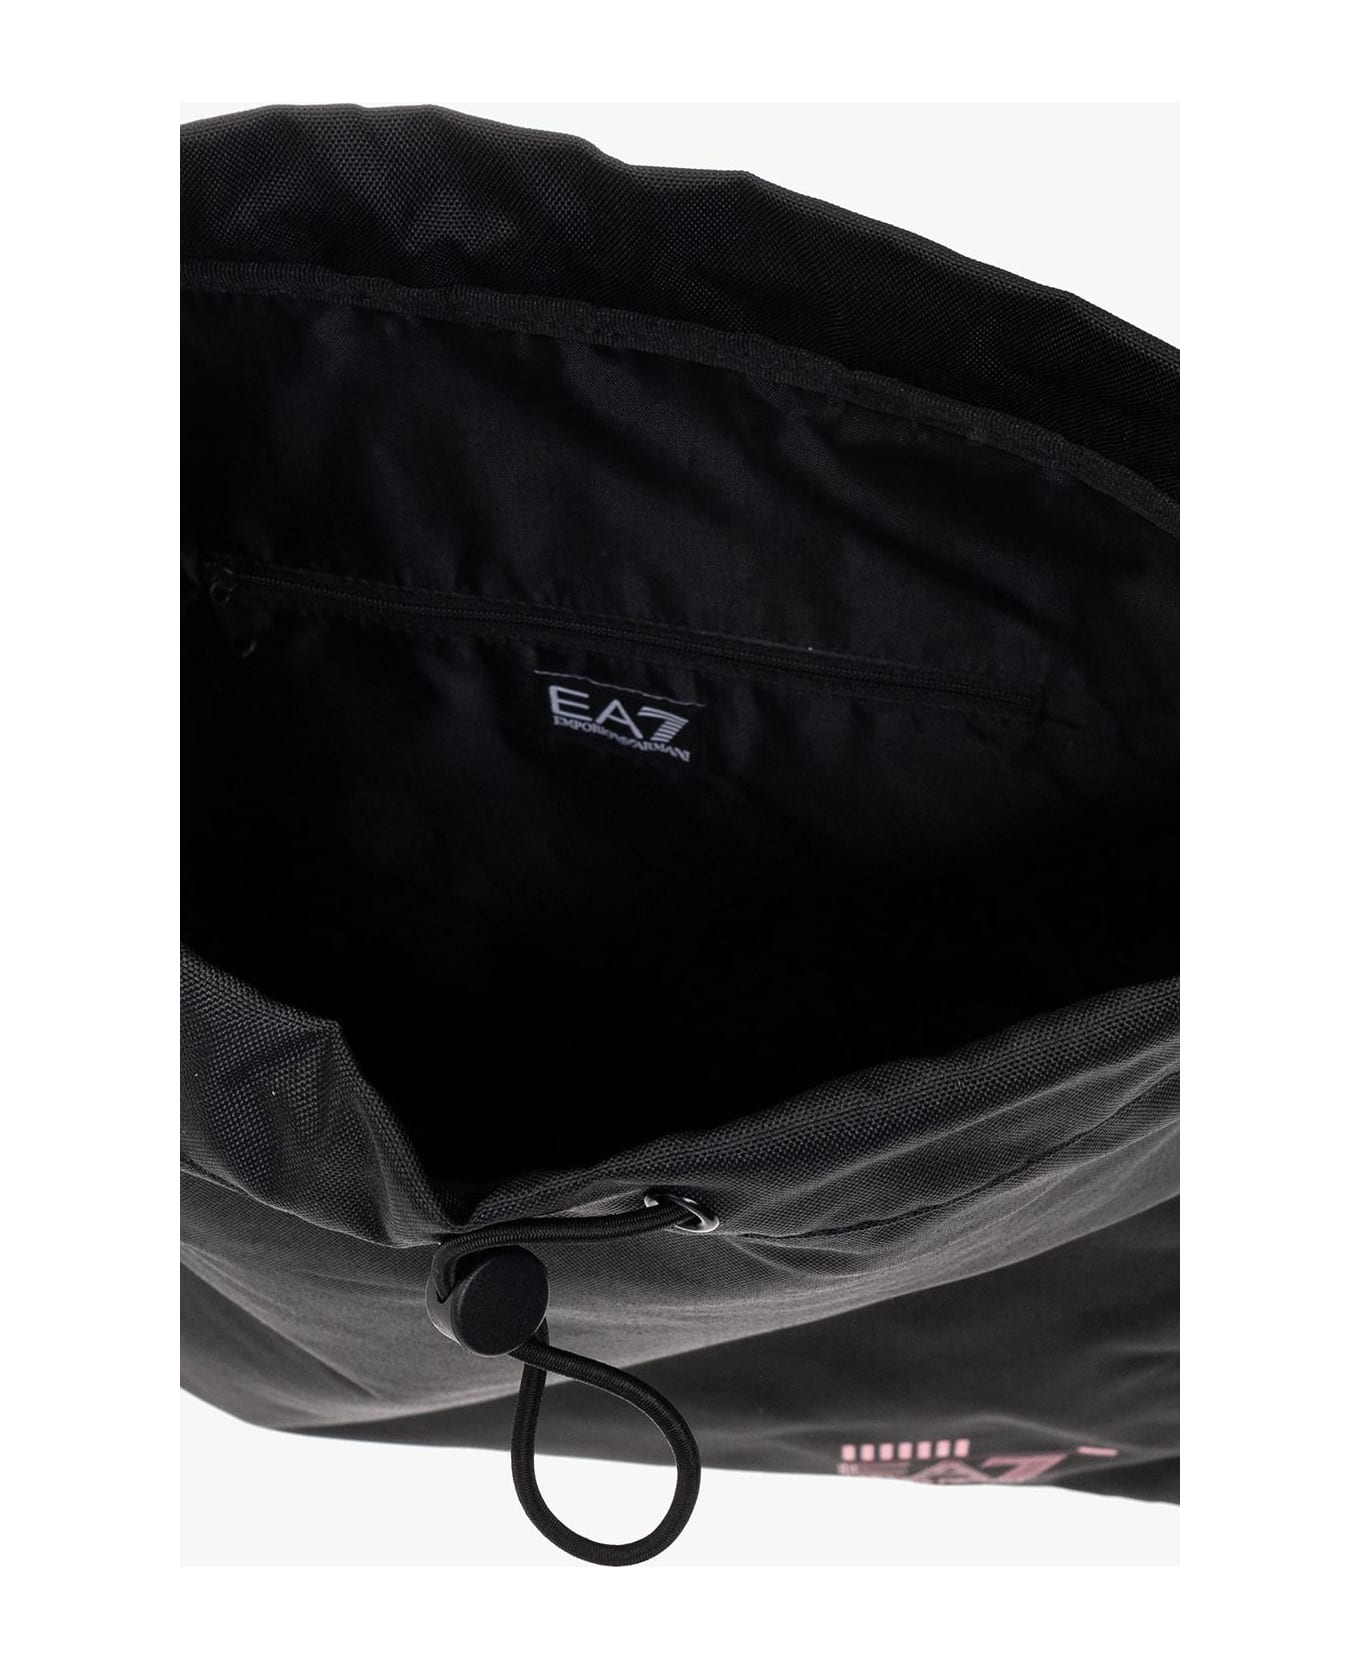 EA7 Emporio Armani 'sustainable' Collection Backpack - Black バックパック